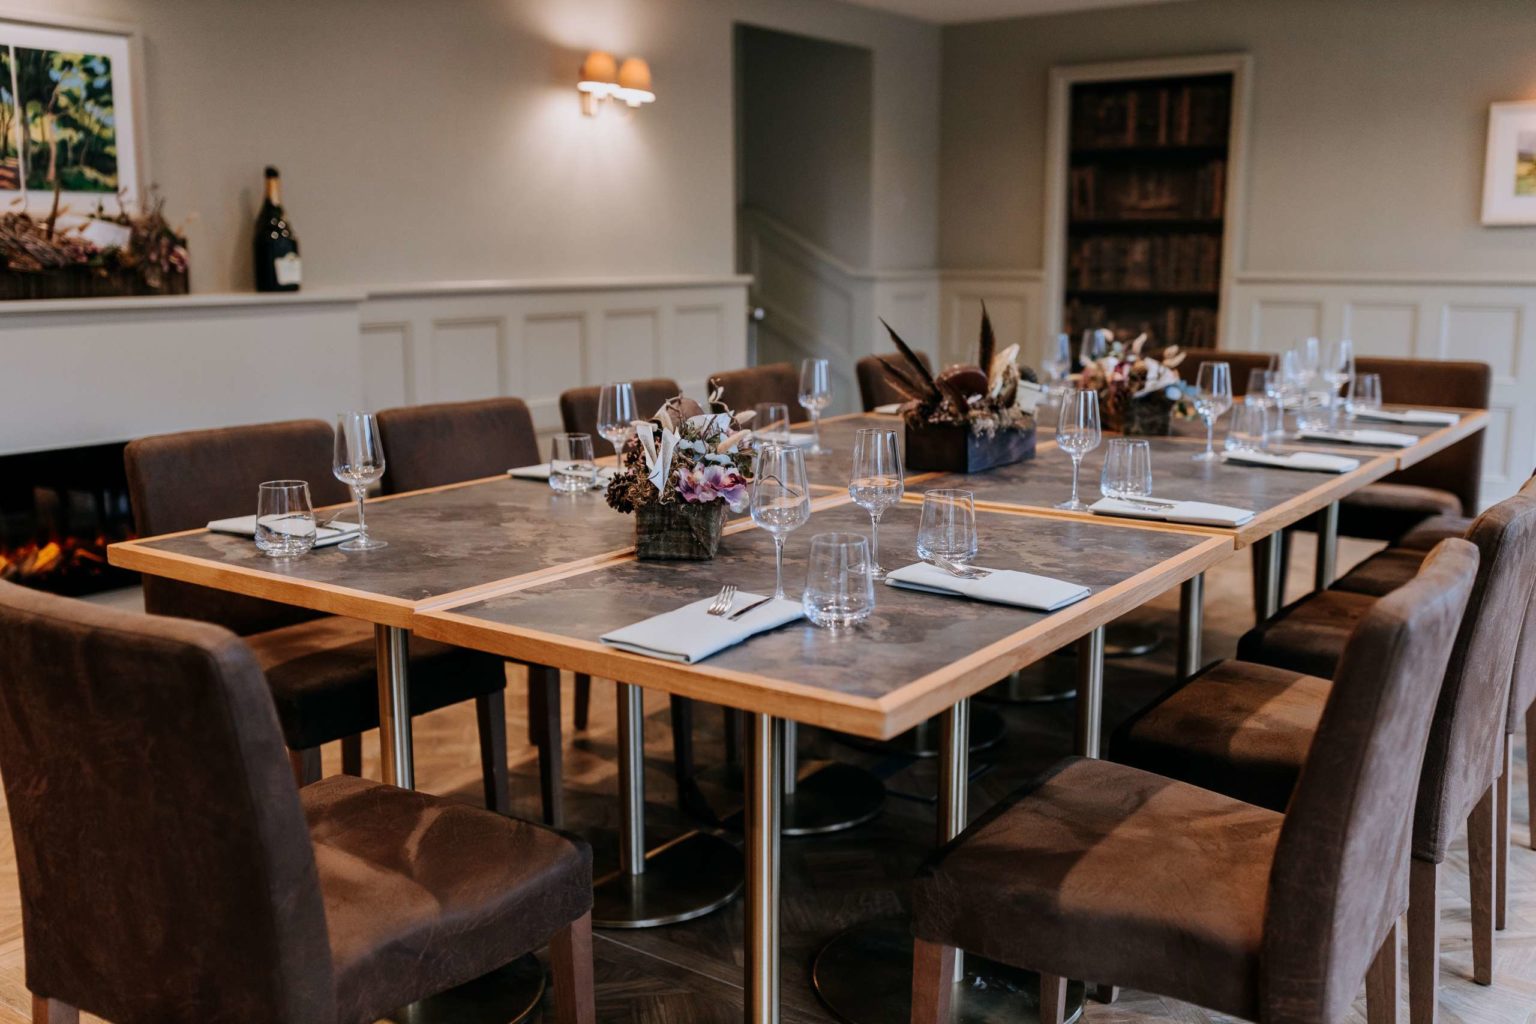 The Arnagill room at Swinton Estate in North Yorkshire set up for a private dining meal